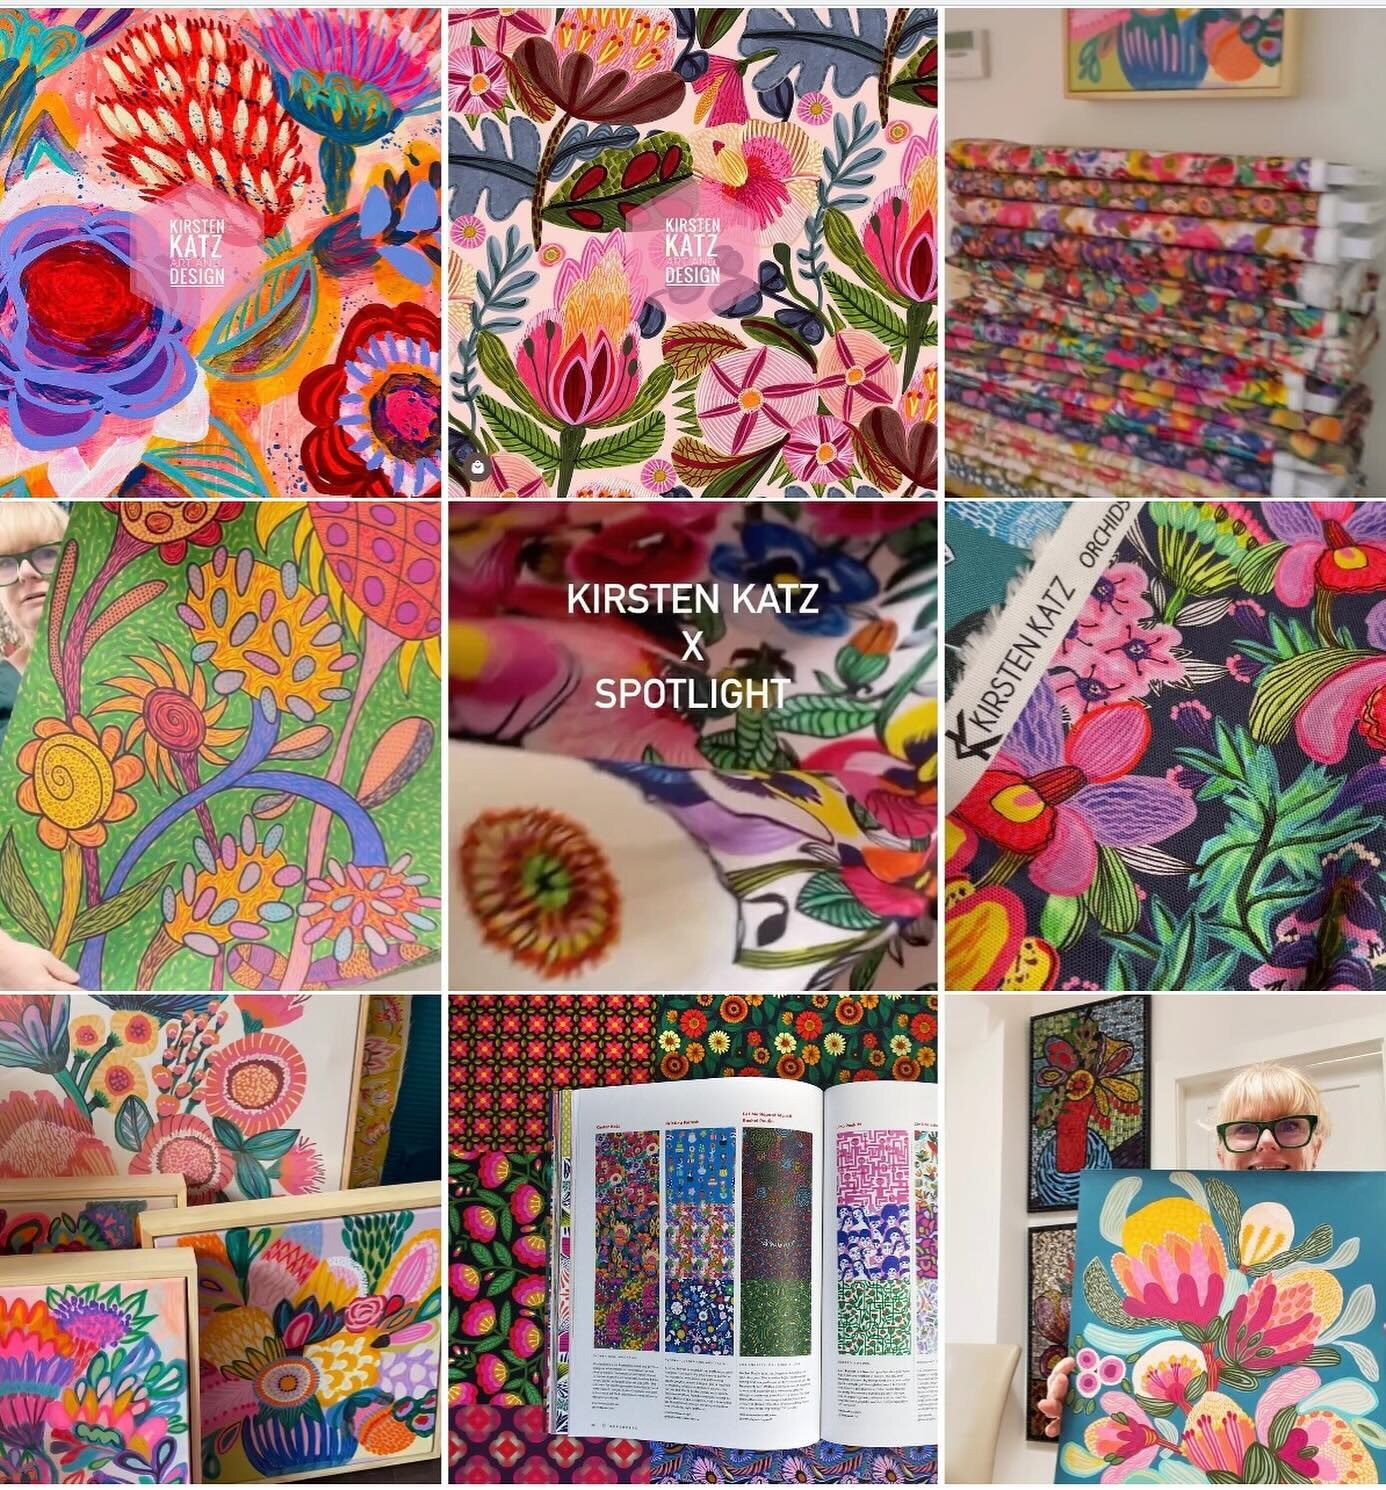 2023 Top 9 posts that you all have liked. 
It is a great mixture of fabrics, art, licensing and achievements. This year I achieved quite a lot not only with my artwork, licensing &amp; collaborations but also in designing new products, working on beh